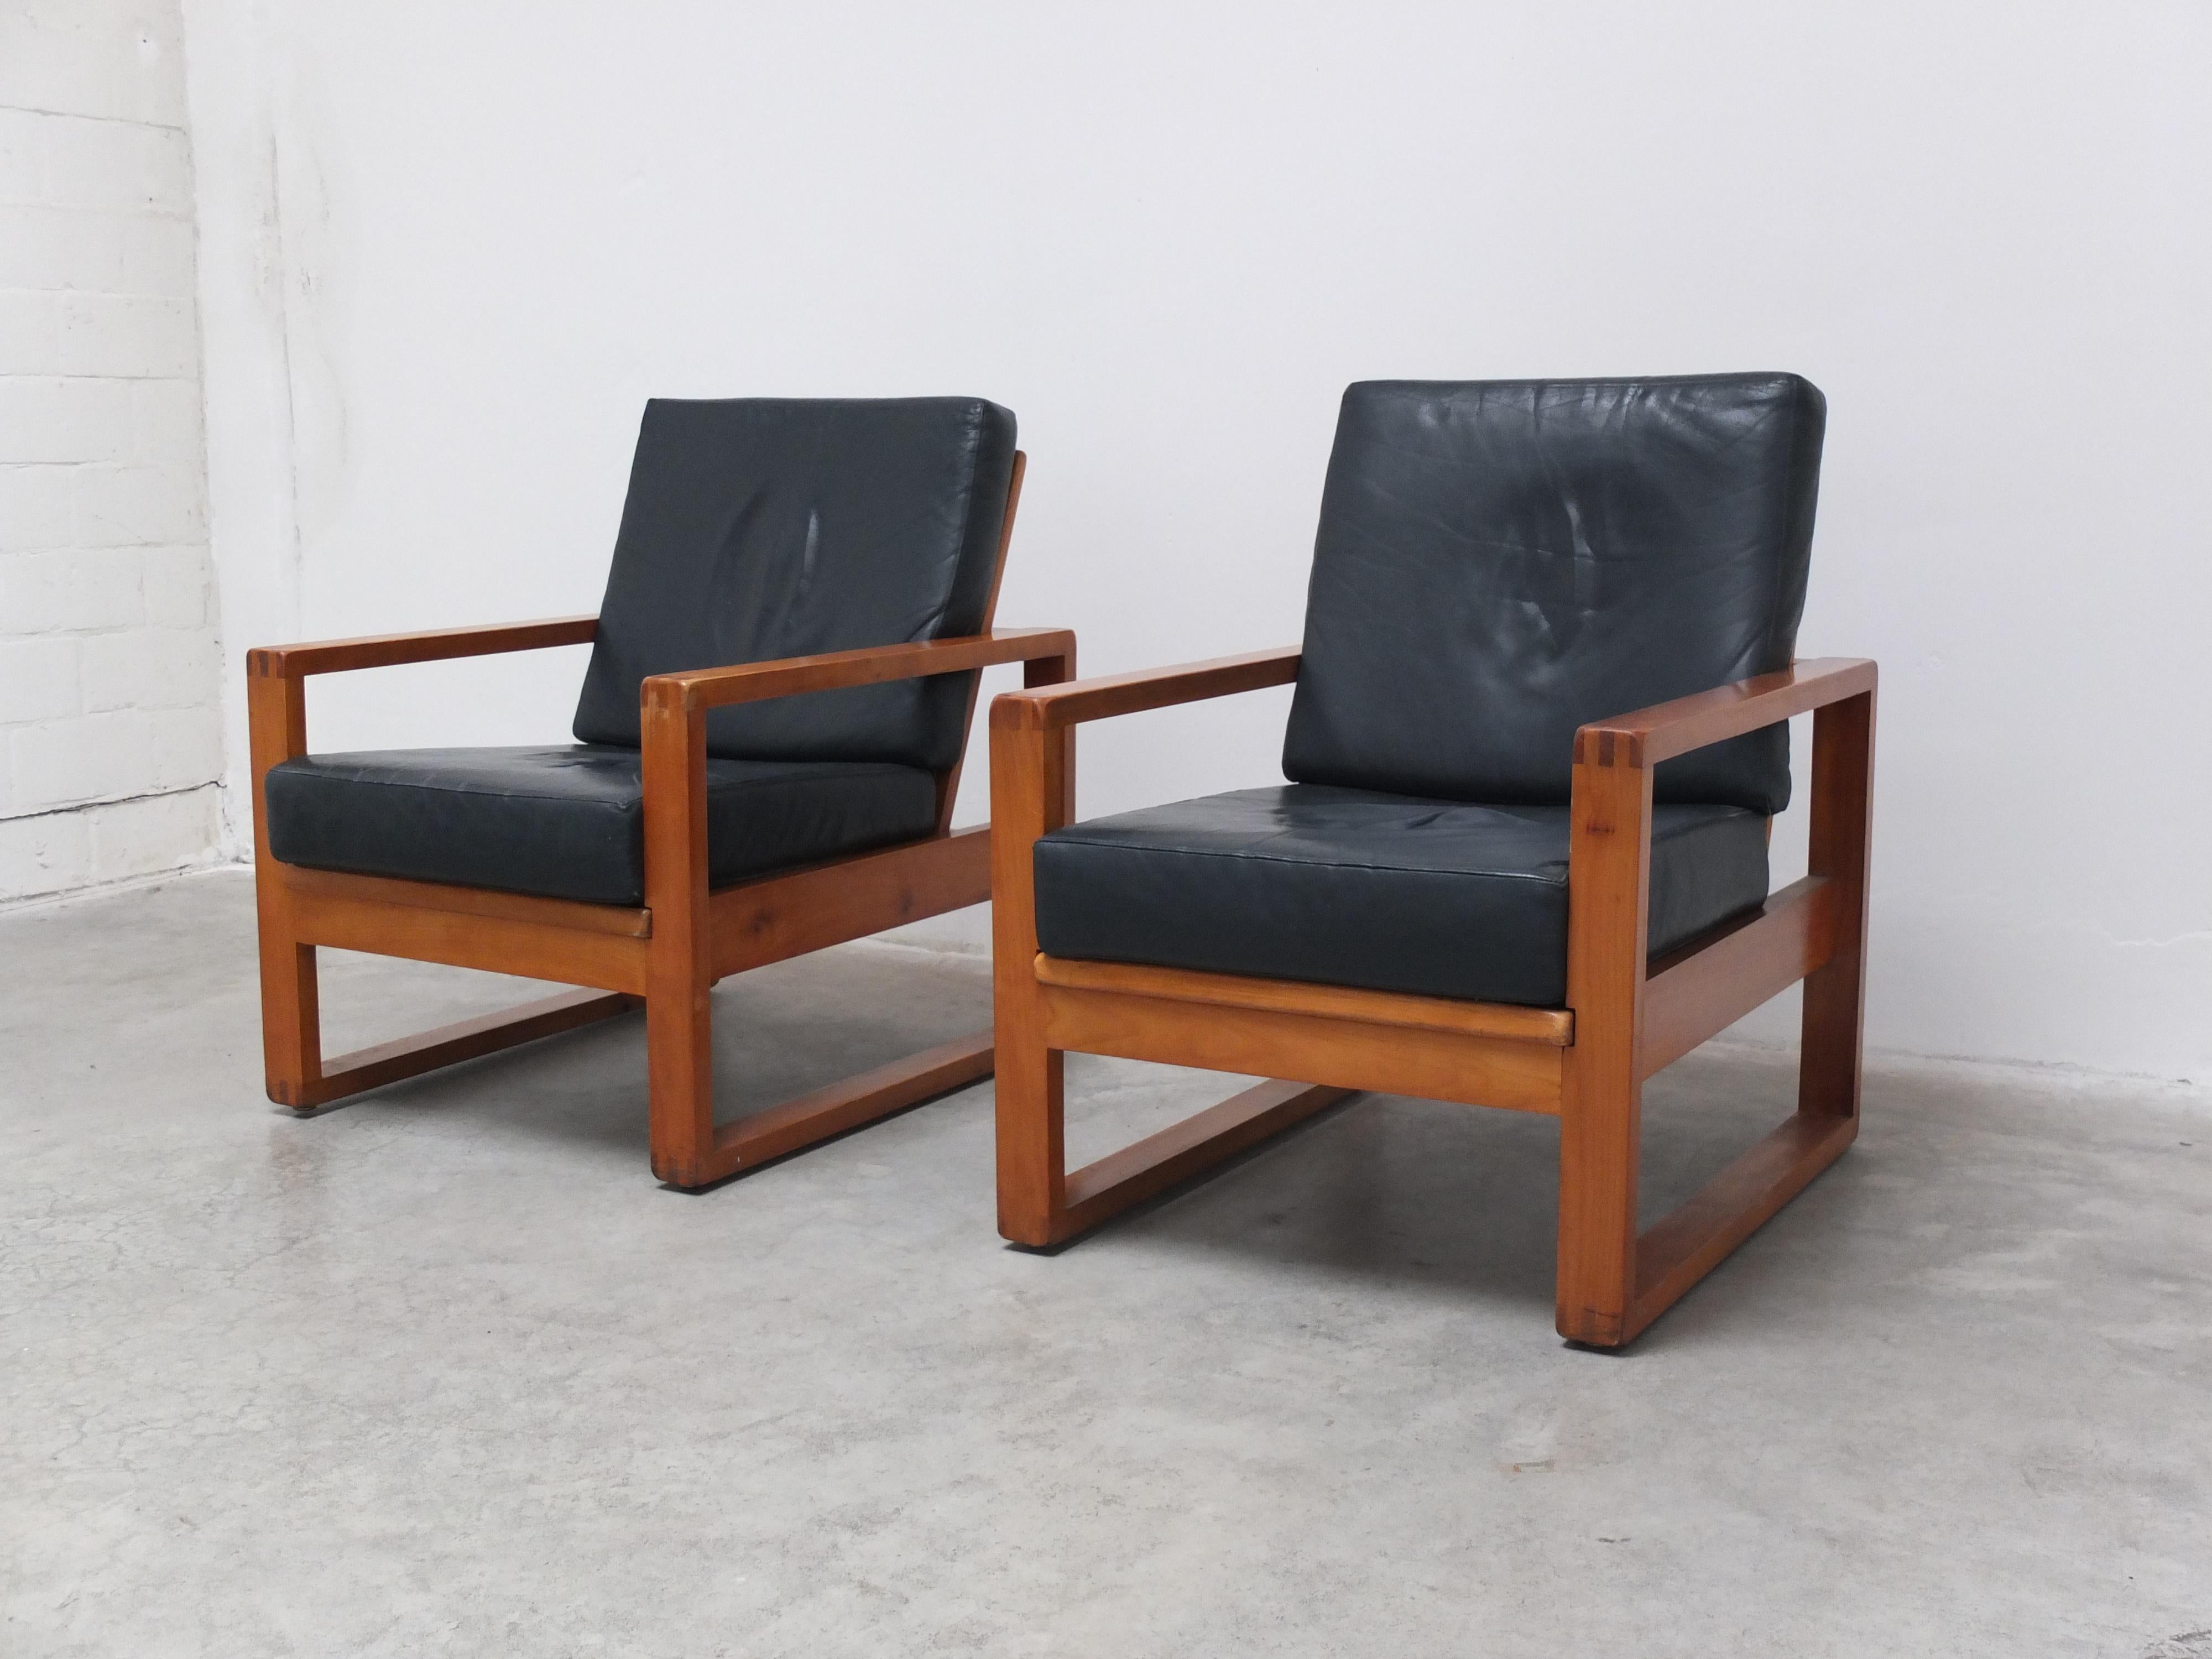 Belgian Unique Pair of Modernist Lounge Chairs by Van Den Berghe-Pauvers, 1960s For Sale